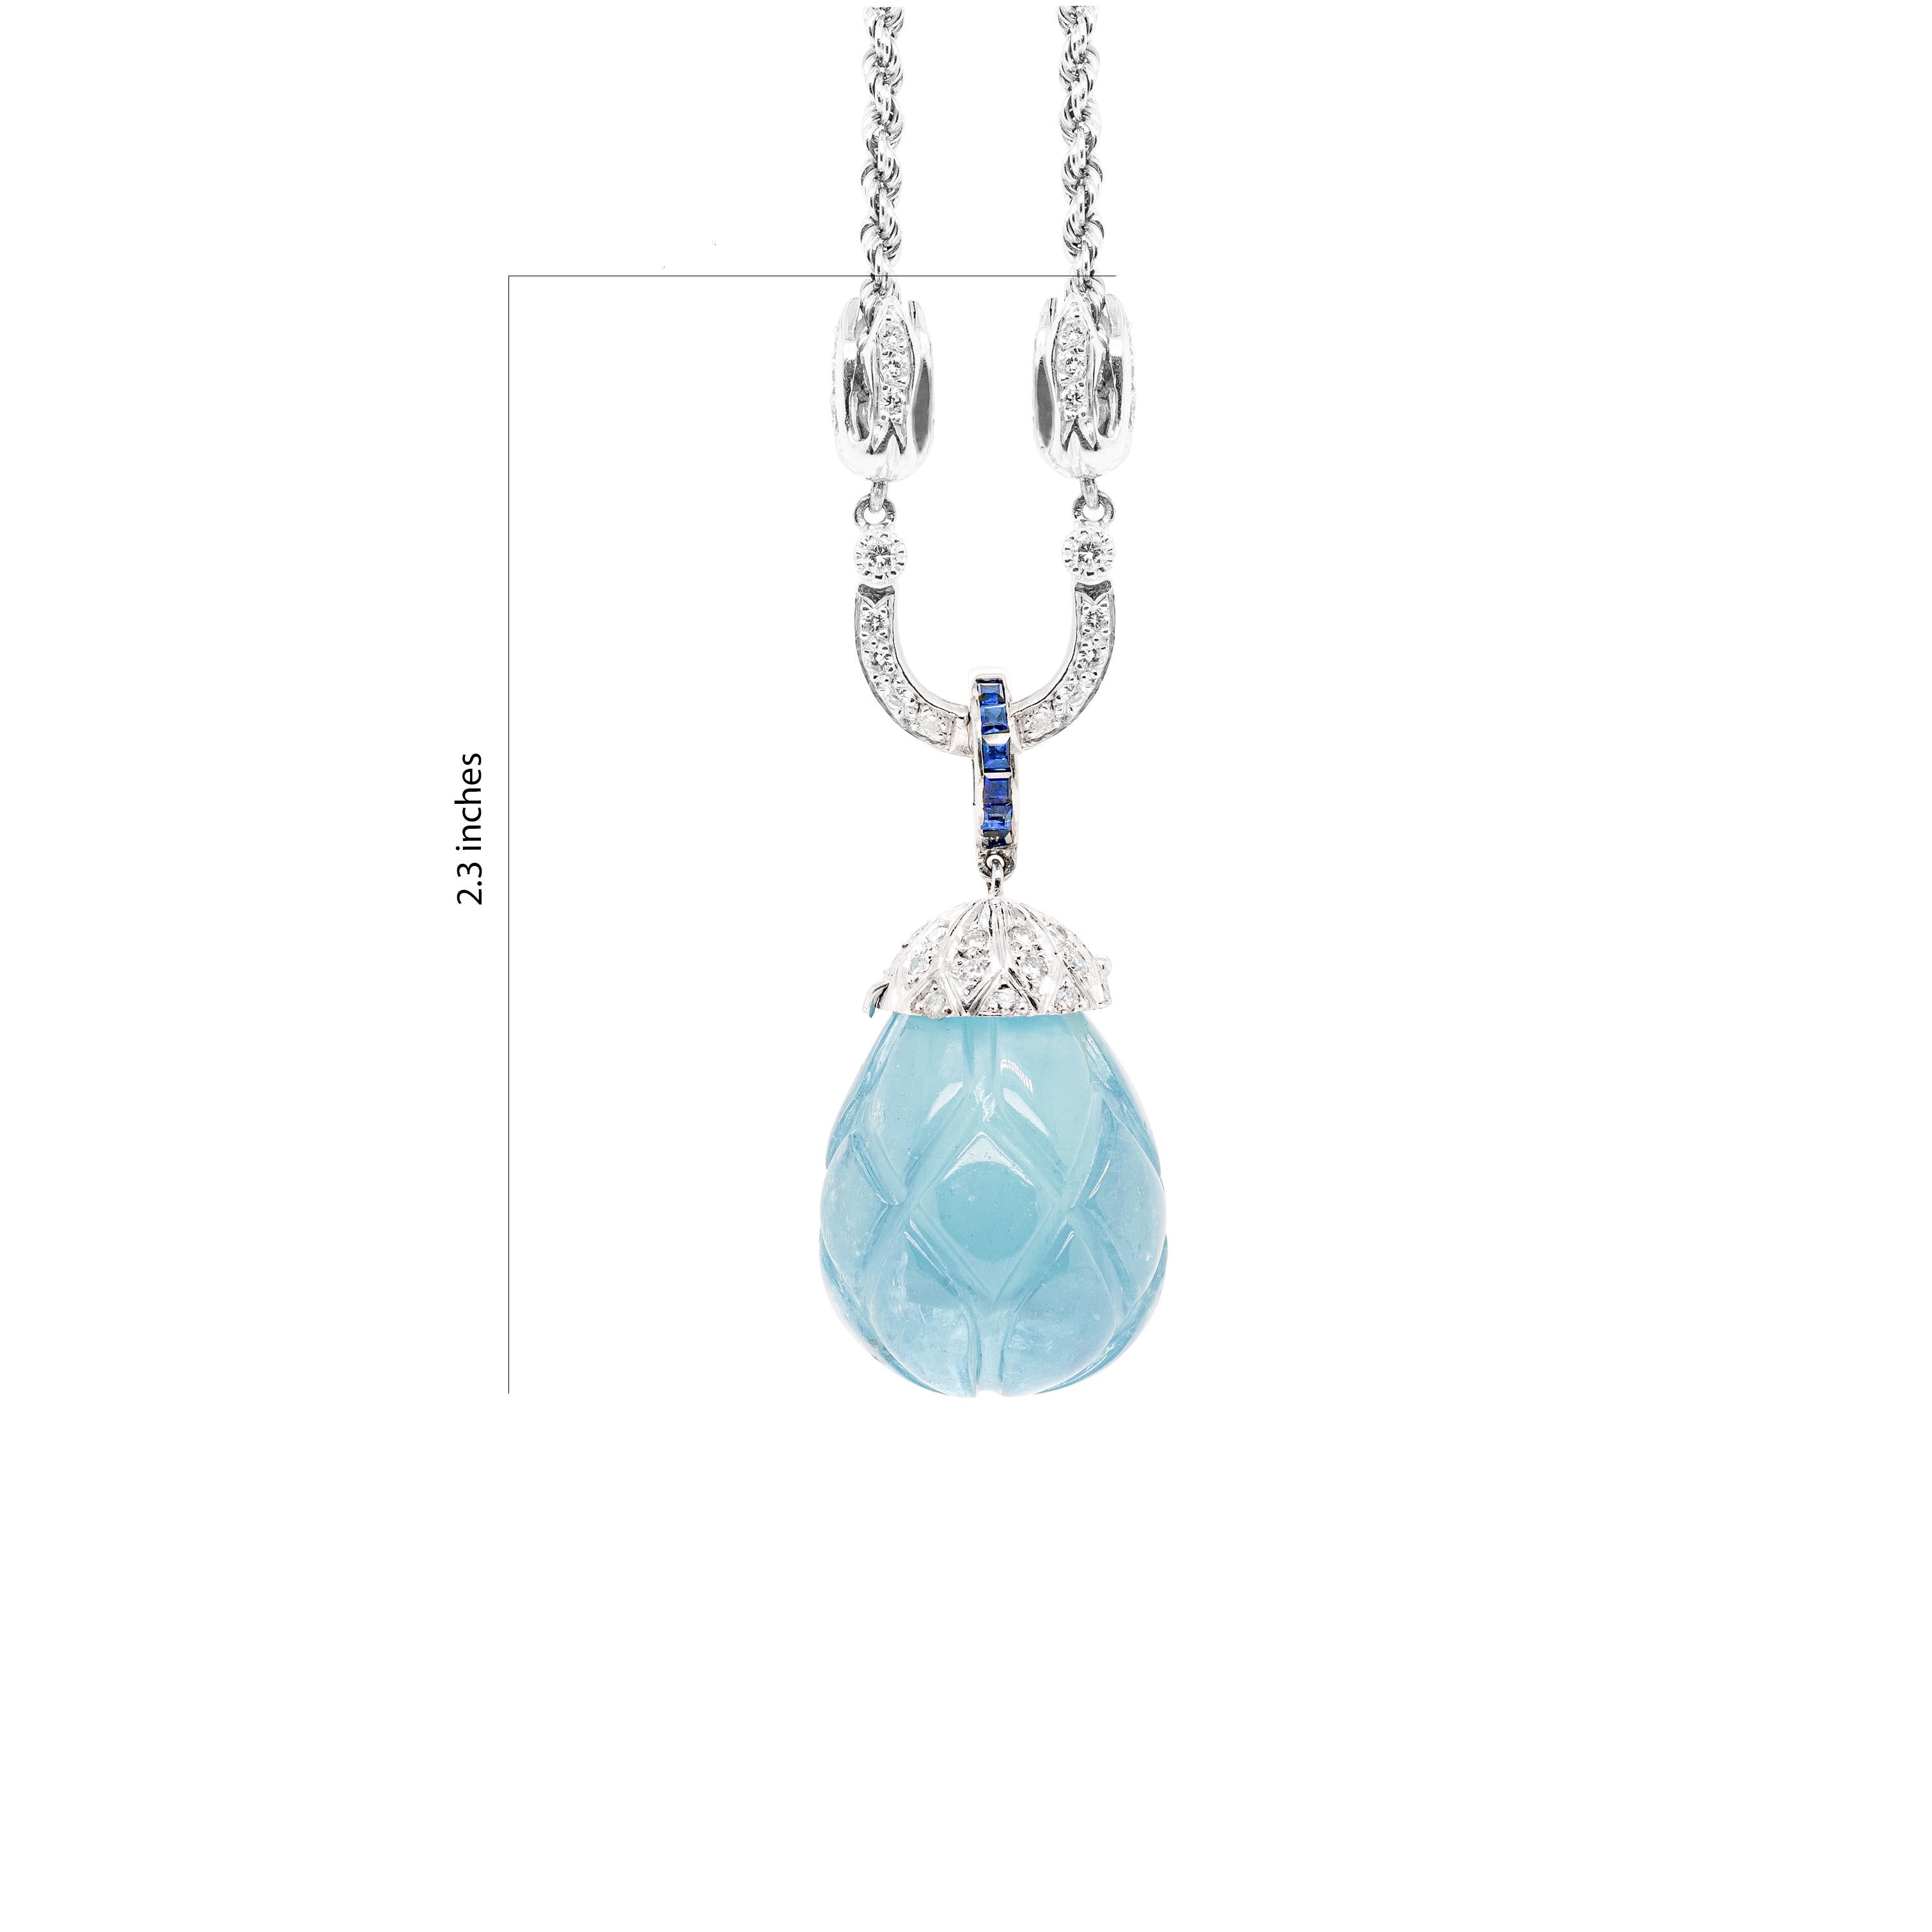 Carved Cabochon Aquamarine Diamond and Sapphire 18ct Gold Drop Necklace For Sale 1